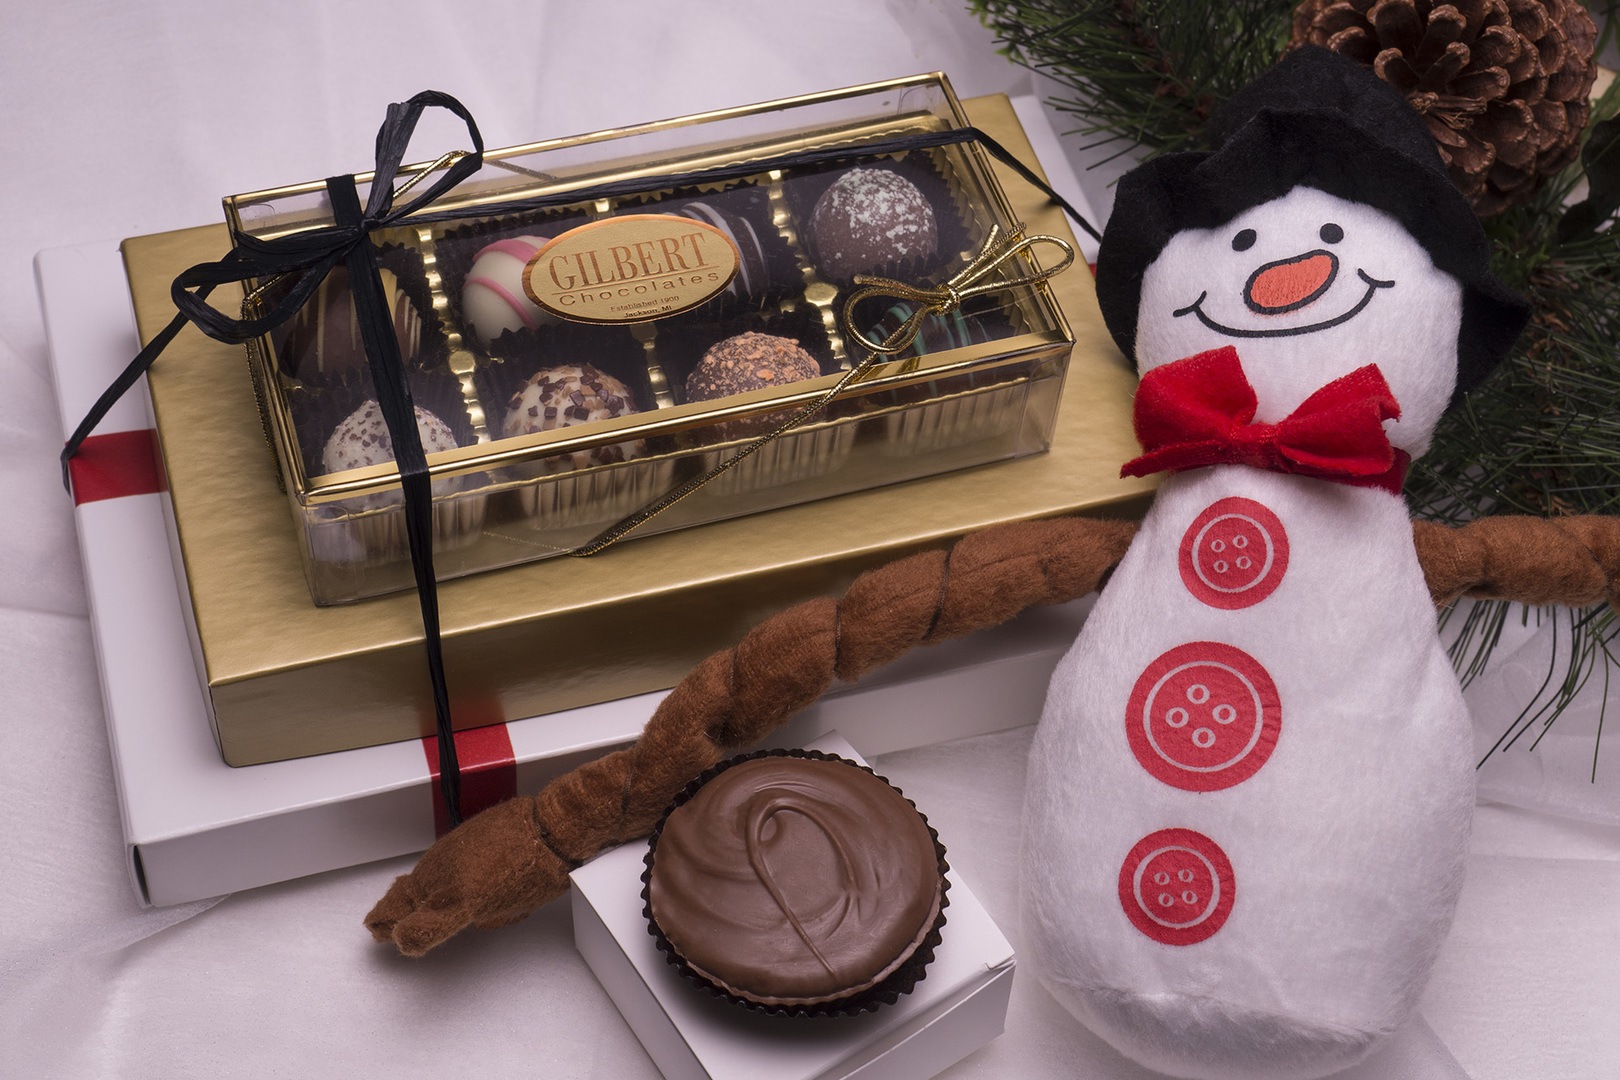 What to Choose in Chocolates for Christmas Gifting?